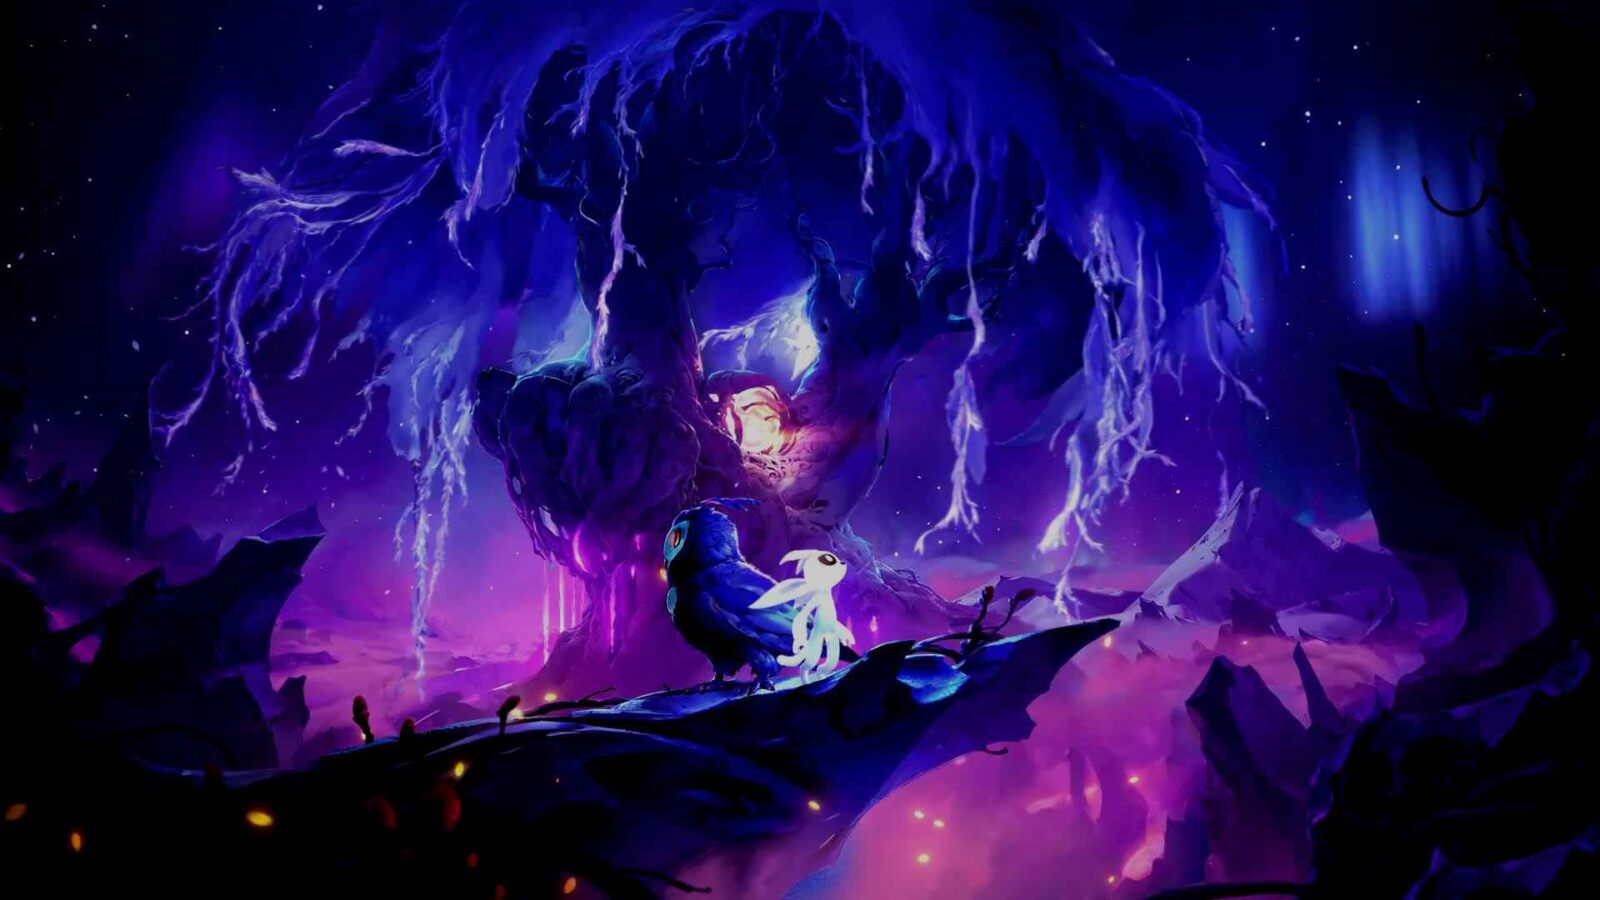 LiveWallpapers4Free.com | Ori And The Will Of The Wisps - Free Live Wallpaper